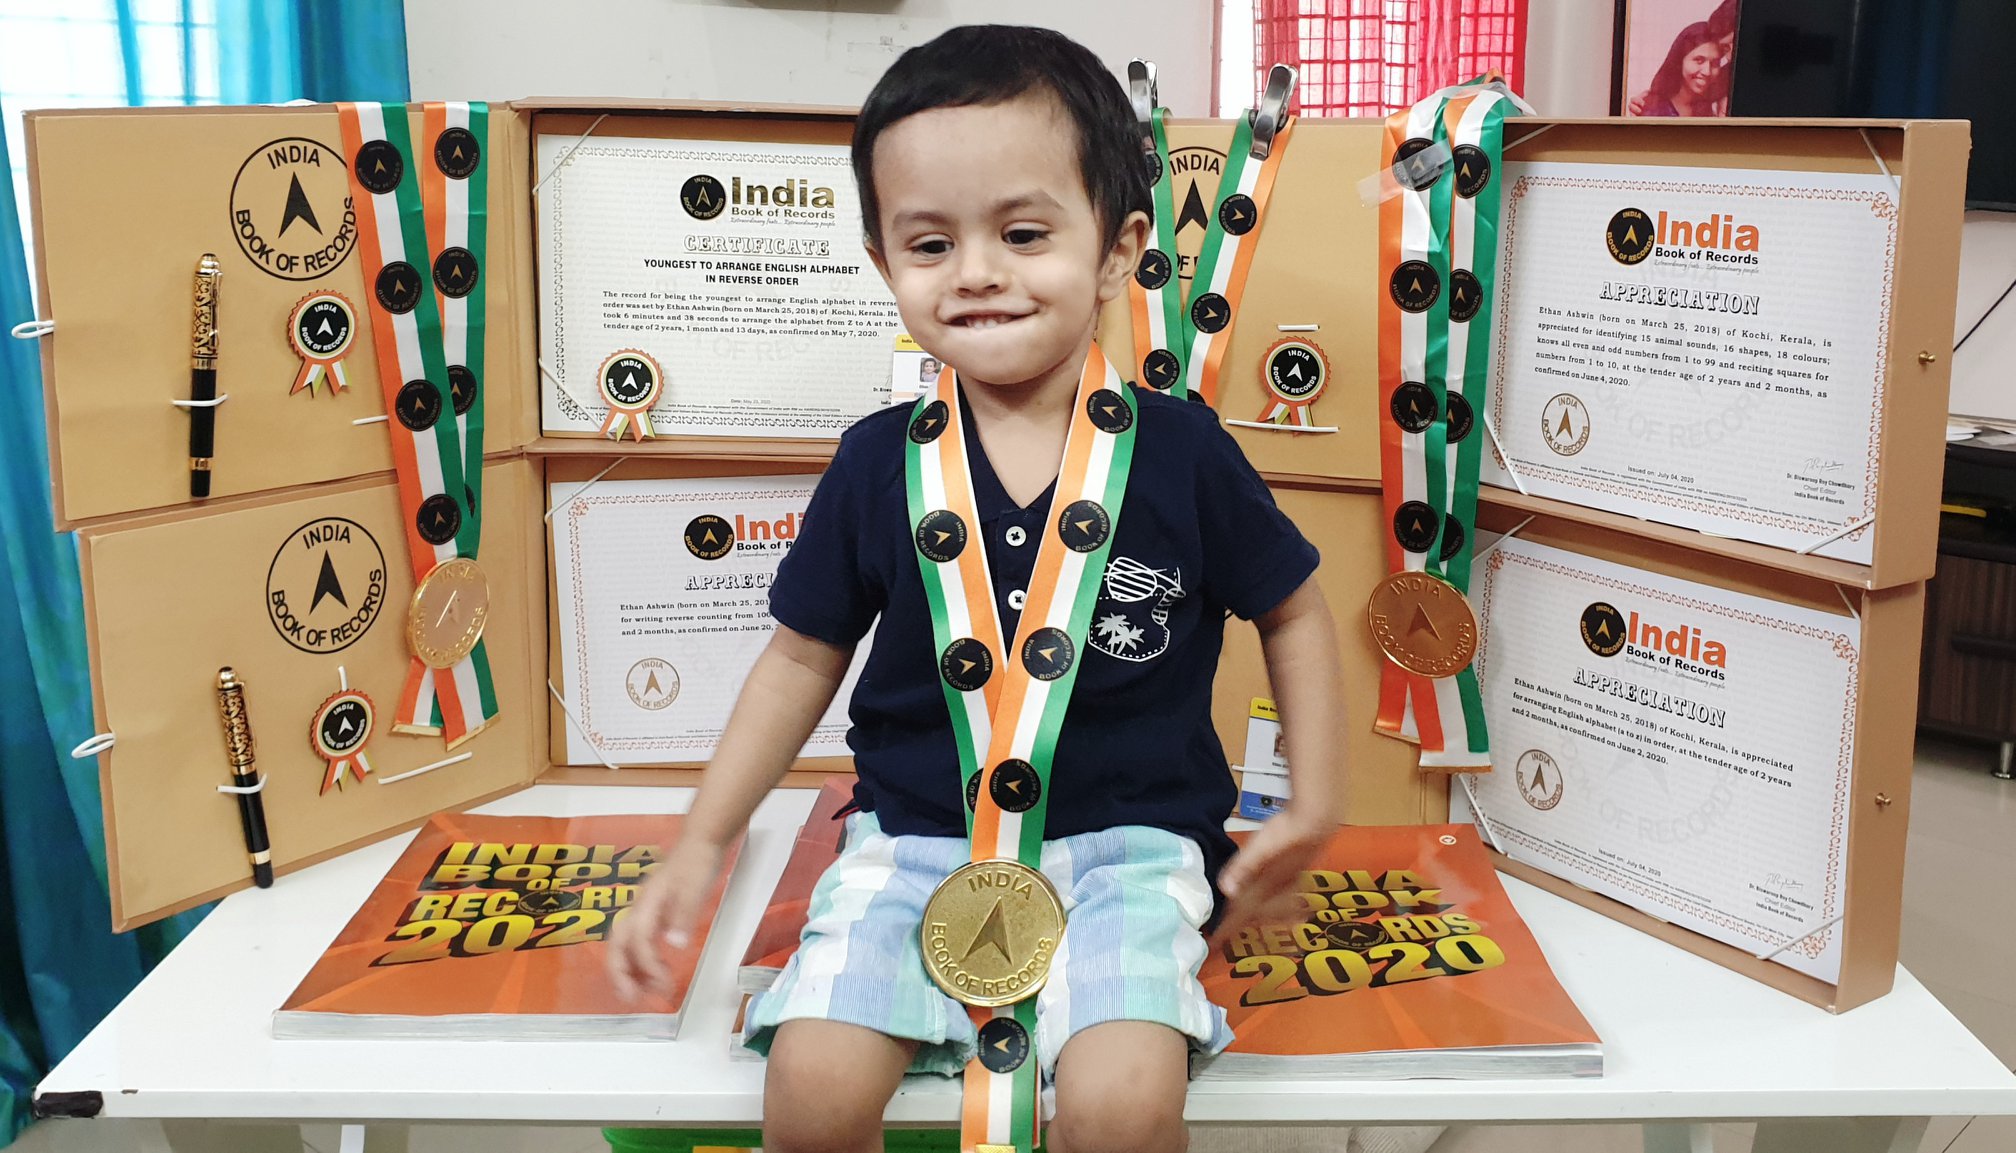 Two year old Ethan entered India book of records